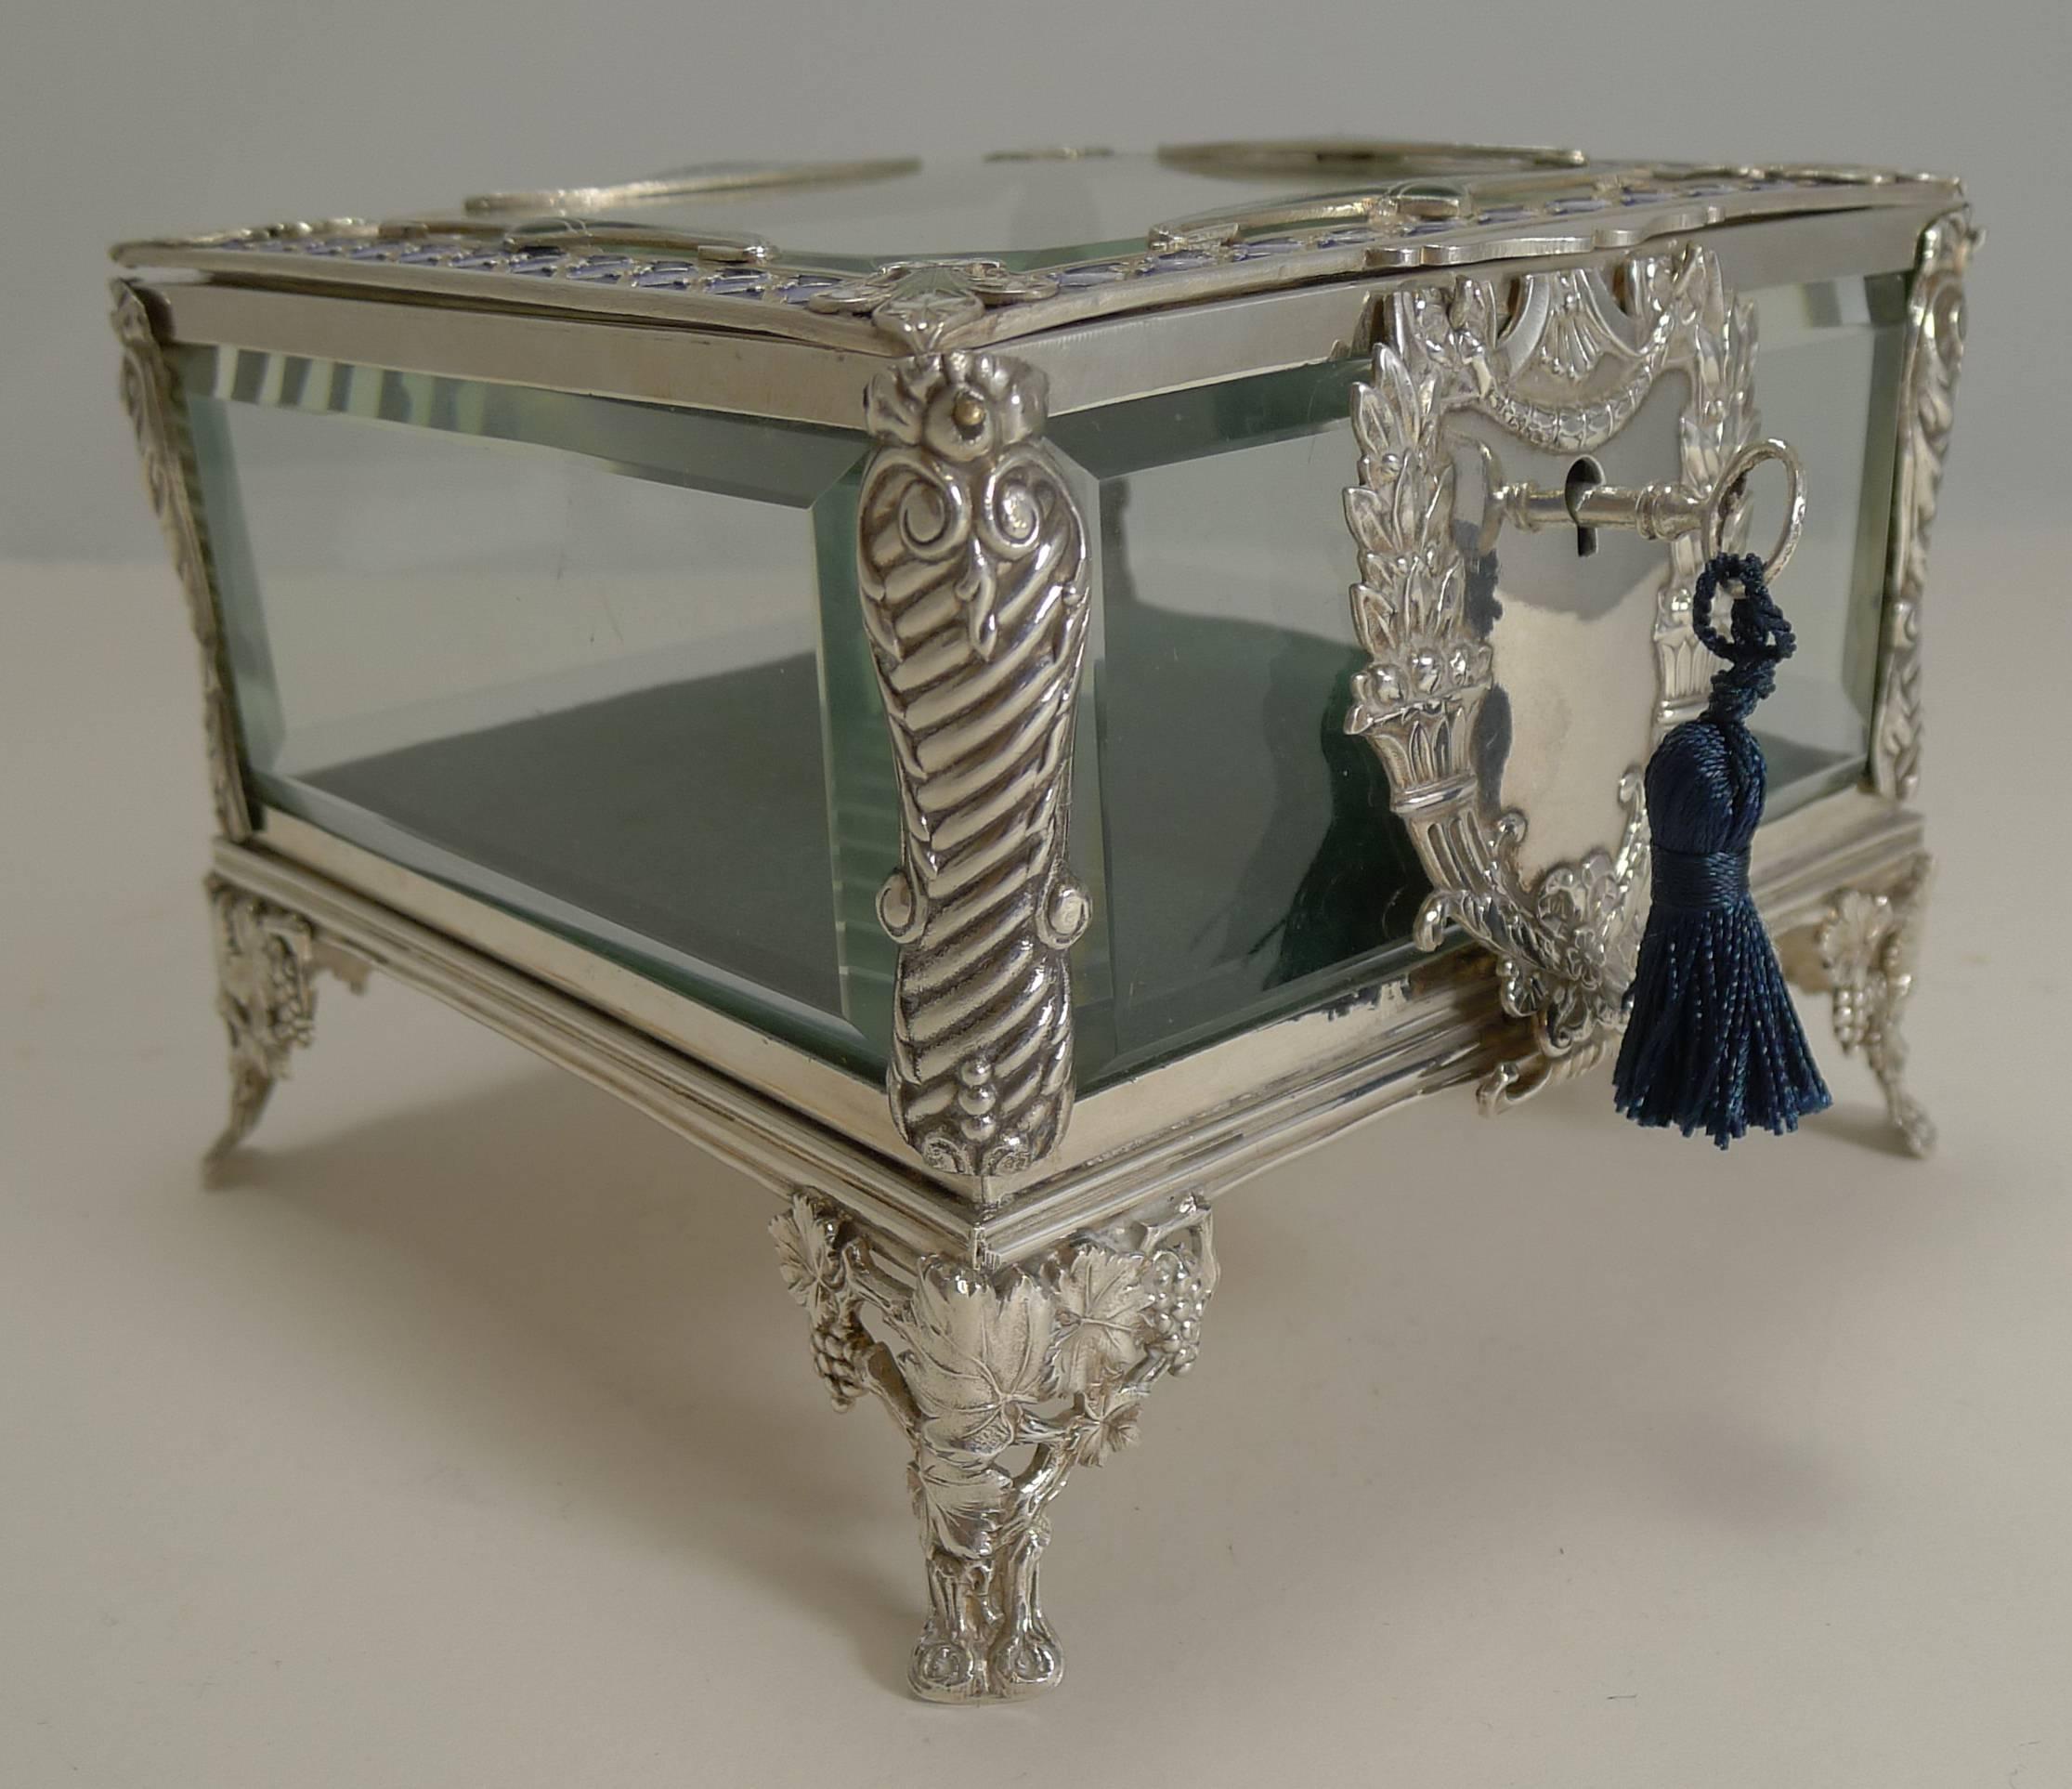 An absolutely splendid French jewellery casket made from silver plate, retaining the original panels of cut-glass.

The box stands on four highly decorative feet with a grapevine decoration and the front having the most grand escutcheon housing